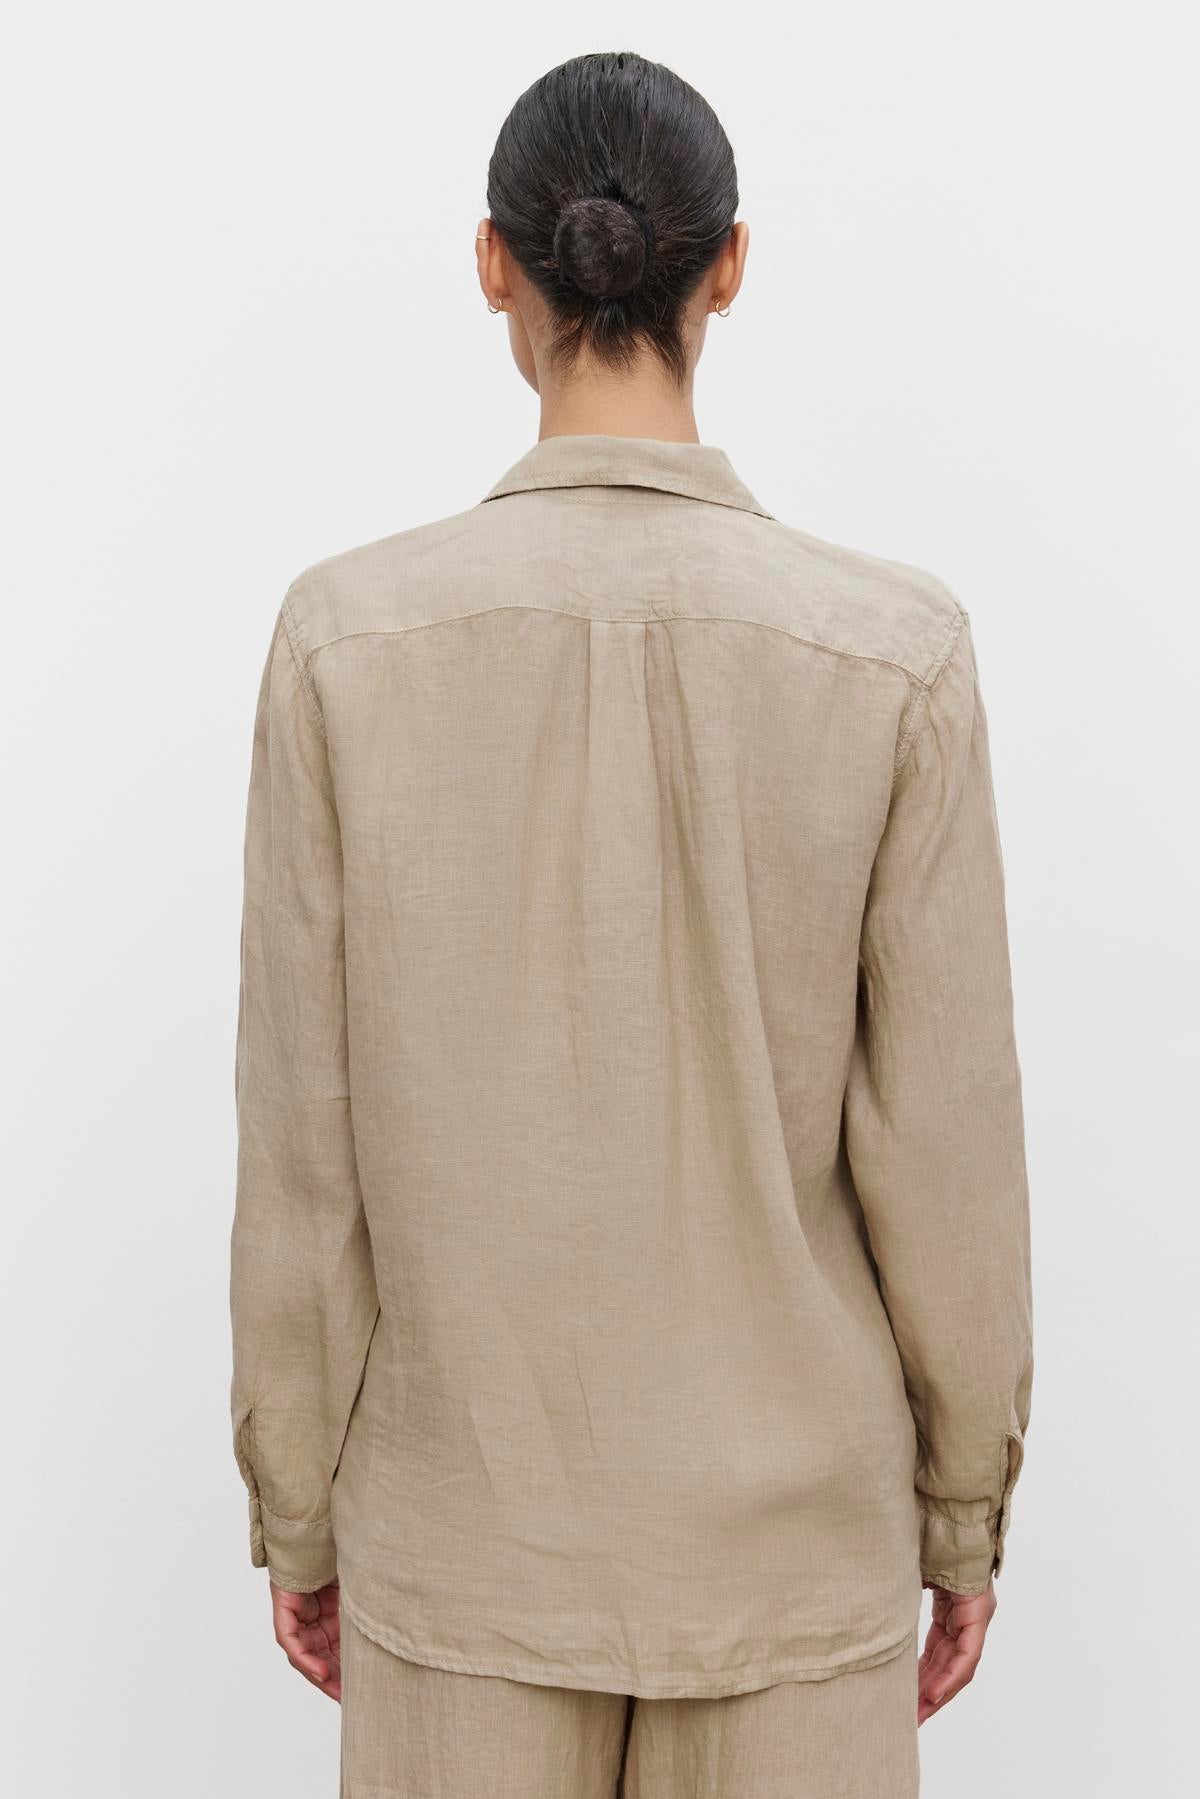 Woman in a Velvet by Jenny Graham Mulholland Shirt with a scooped hemline, viewed from the back.-36463469723841